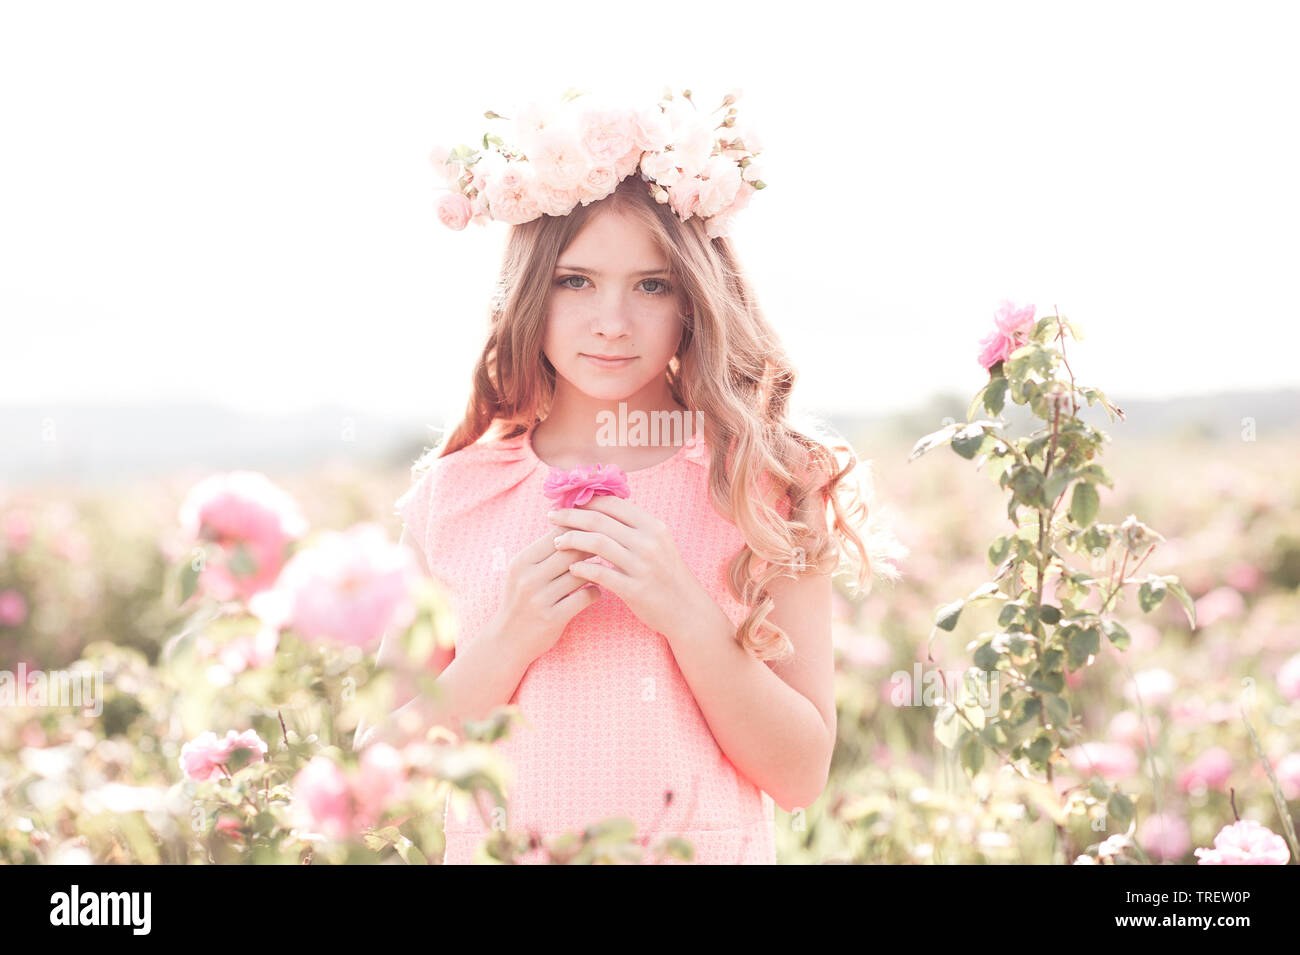 Beautiful blonde girl holding rose outdoors. Posing in meadow. Looking at camera. Stock Photo